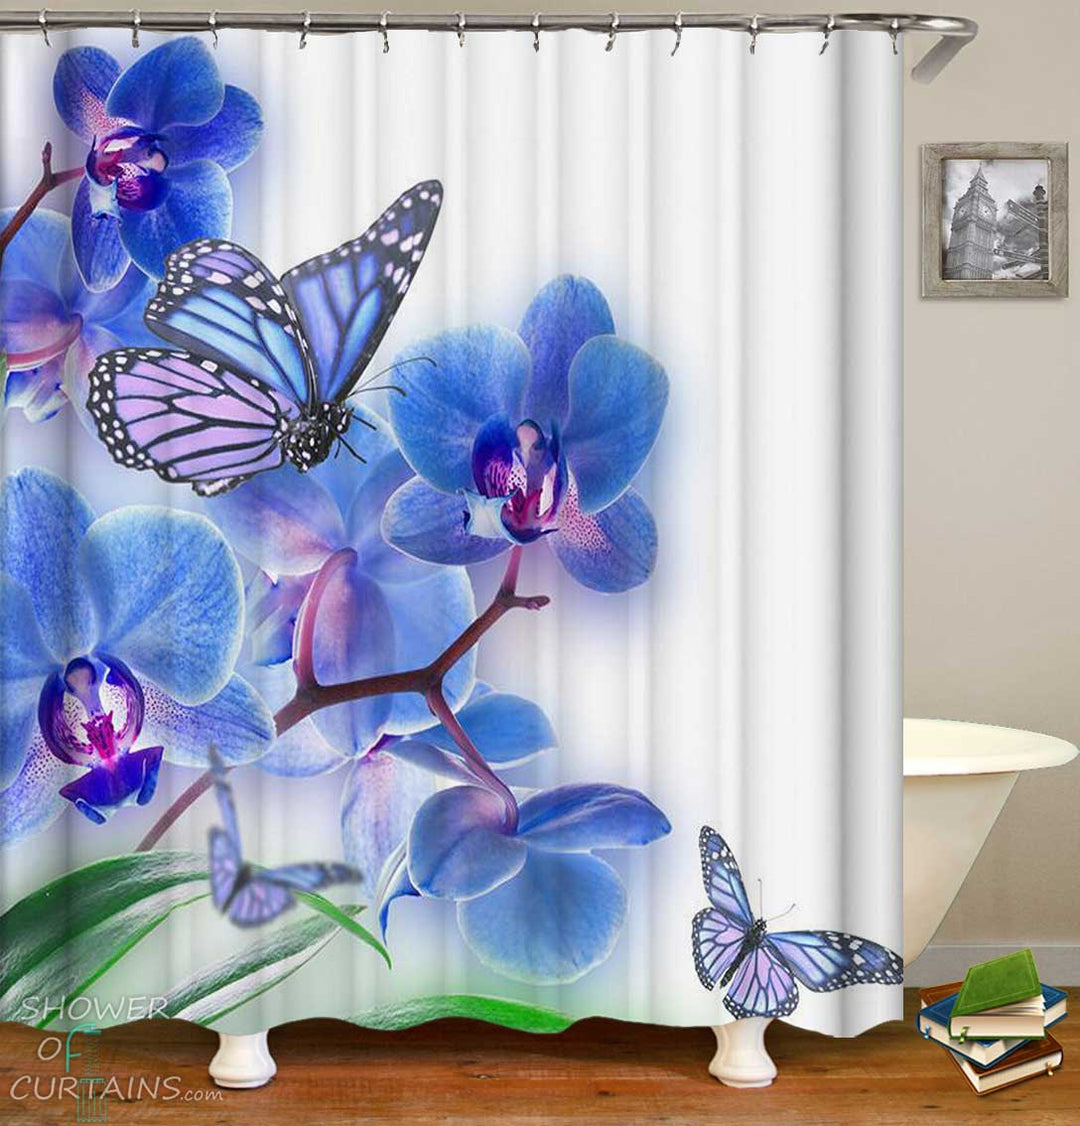 Shower Curtains with Blue Orchid Flowers and Butterflies